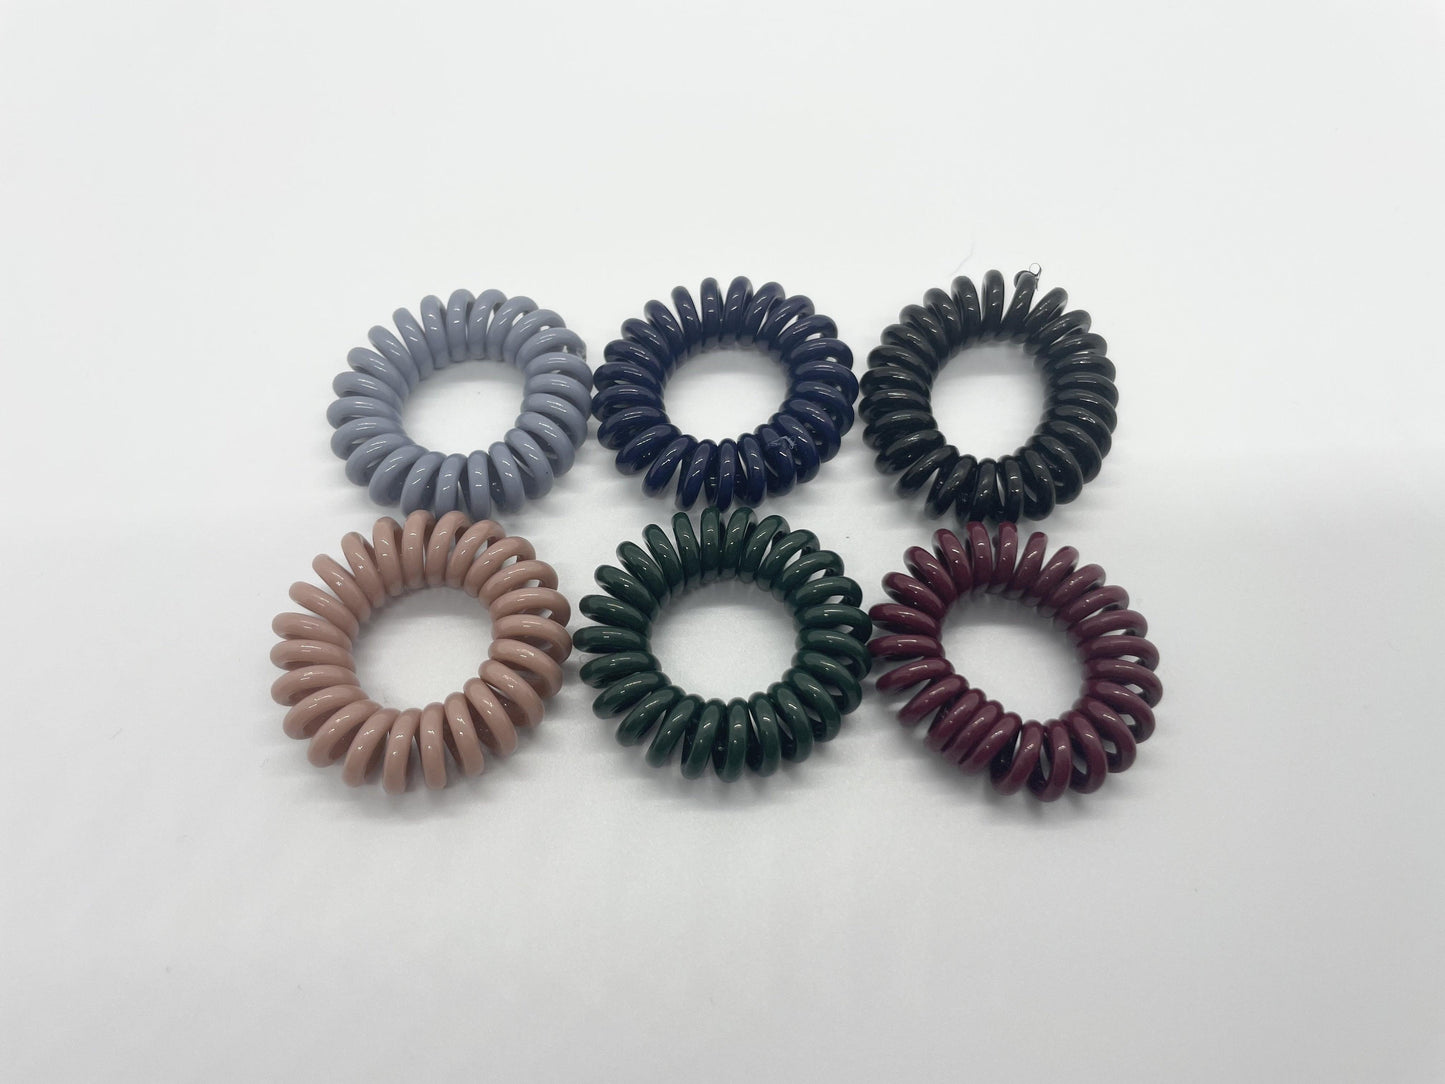 a set of the 6 dark matte color hair ties on a white background